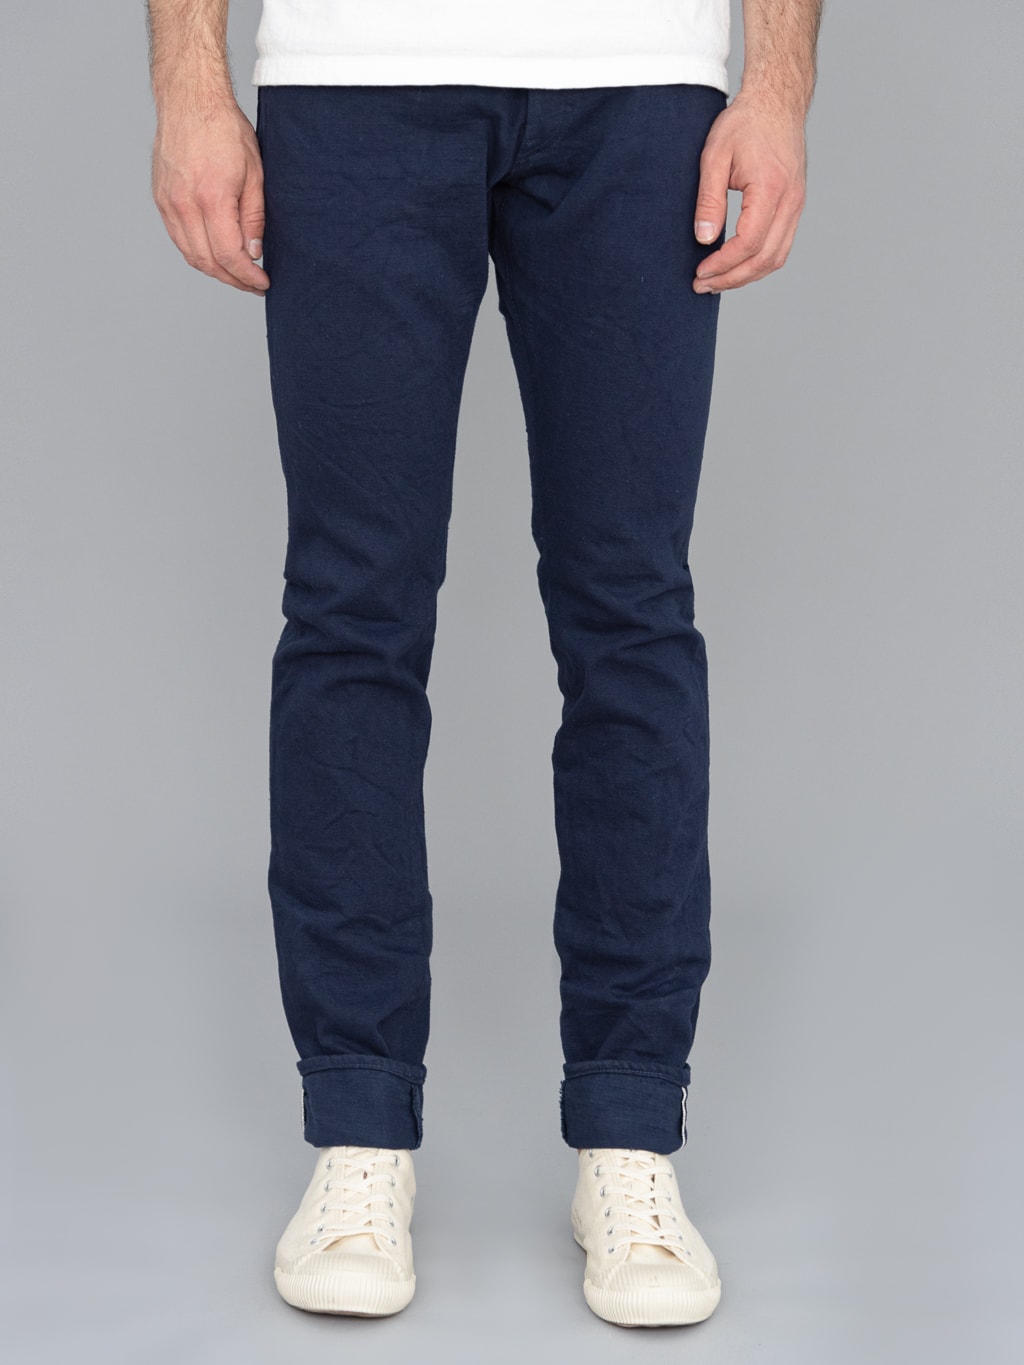 ONI Denim 612 Super Low Tension Navy Relaxed Tapered Jeans front fit